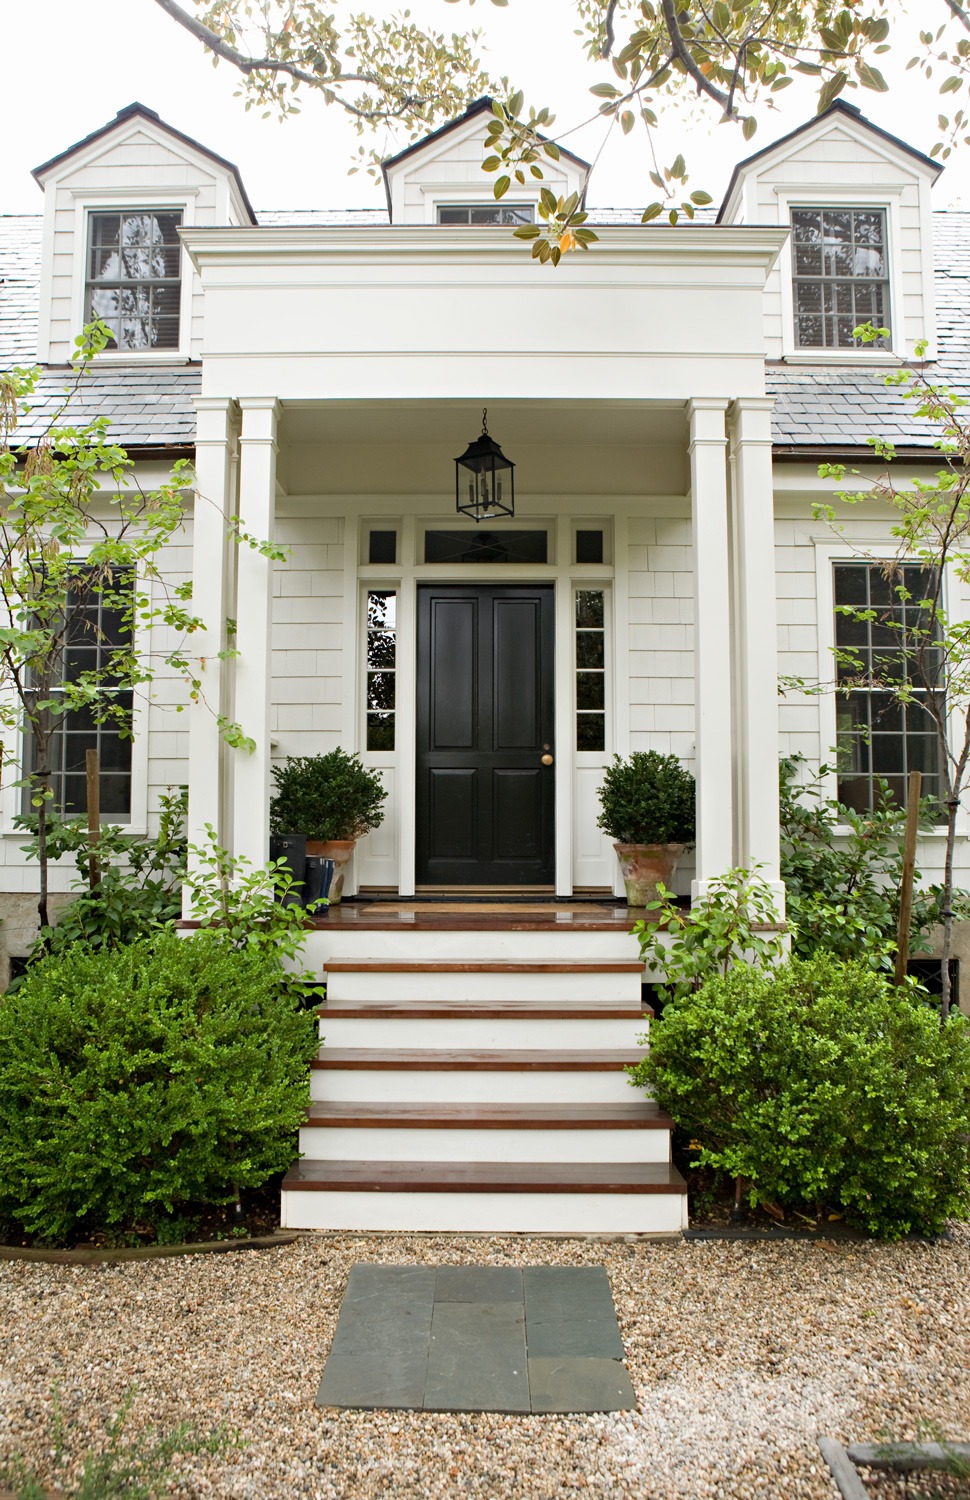 Tim Barber Traditional colonial revival - Swiss Coffee - Best exterior paint colors